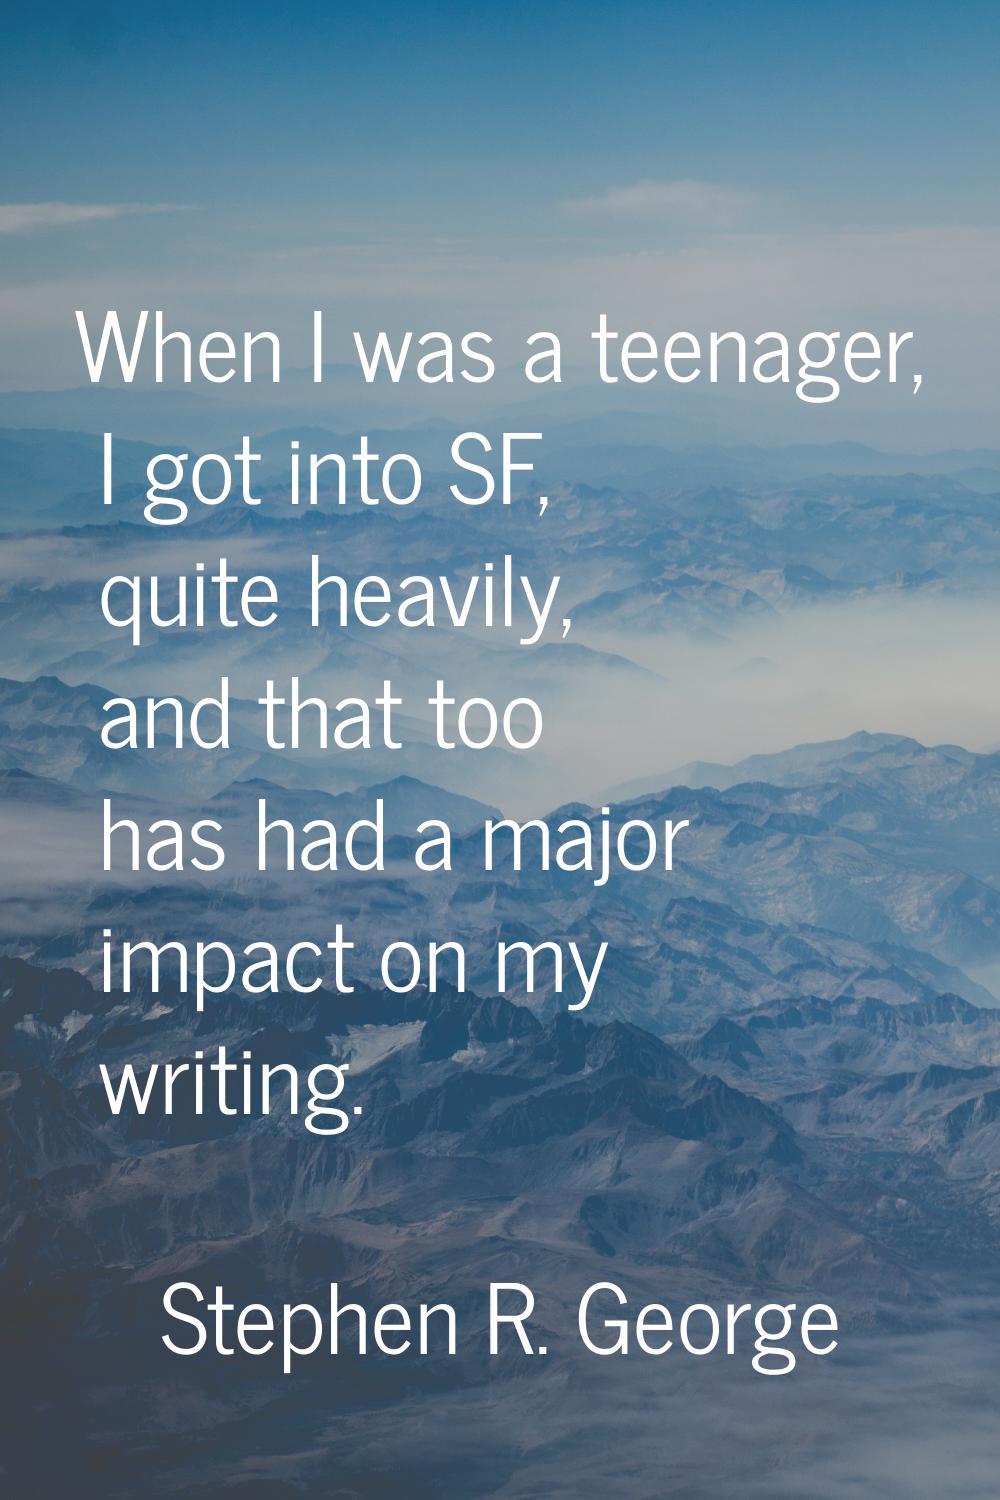 When I was a teenager, I got into SF, quite heavily, and that too has had a major impact on my writ